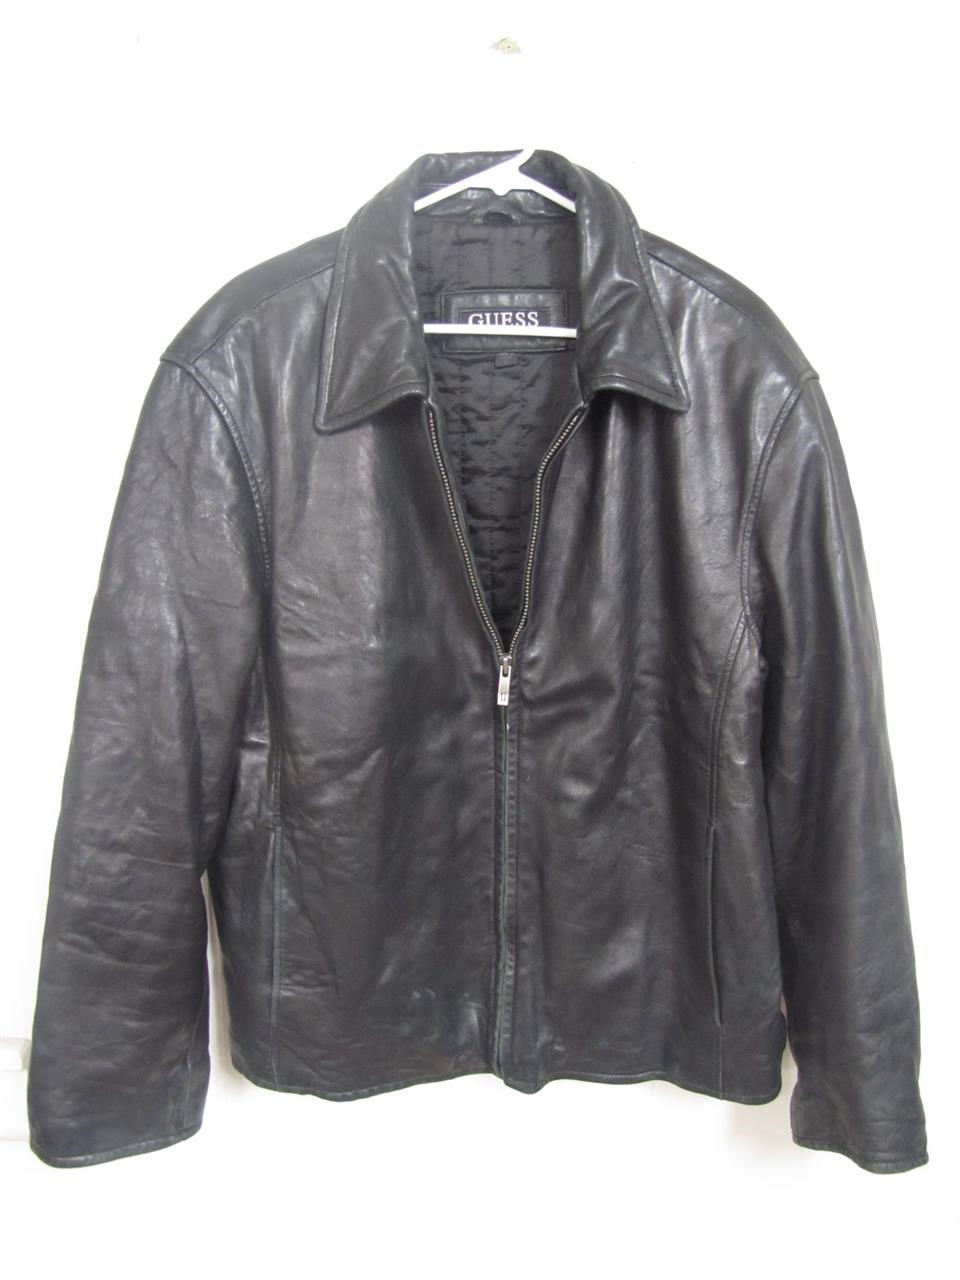 Woman's Large Guess Black Leather Zip-Up Jacket